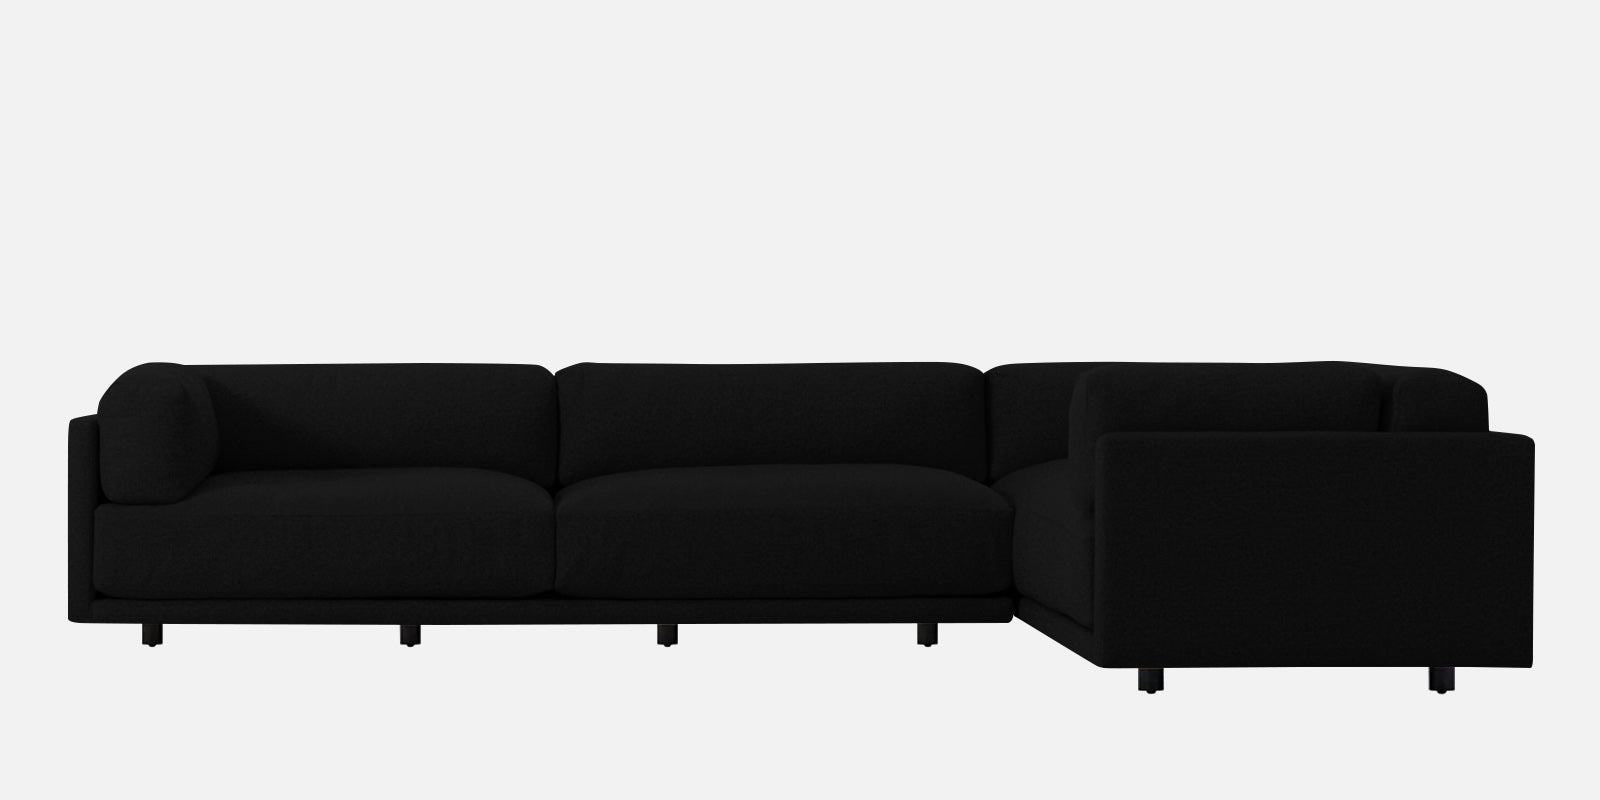 Nixon Fabric 6 Seater LHS Sectional Sofa In Zed Black Colour